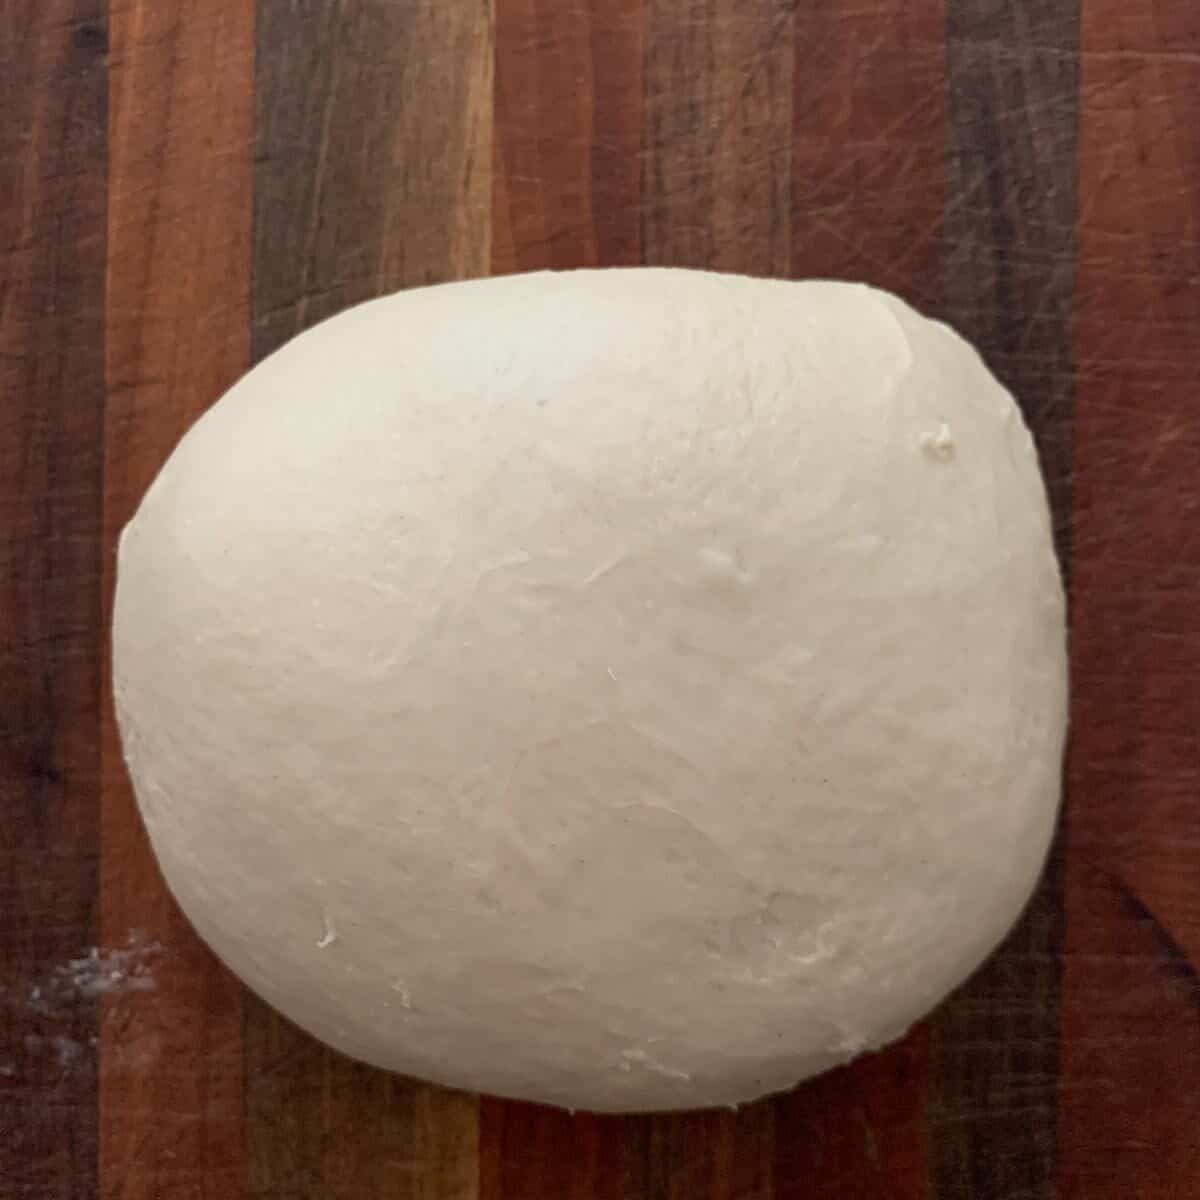 dough ball on wooden background